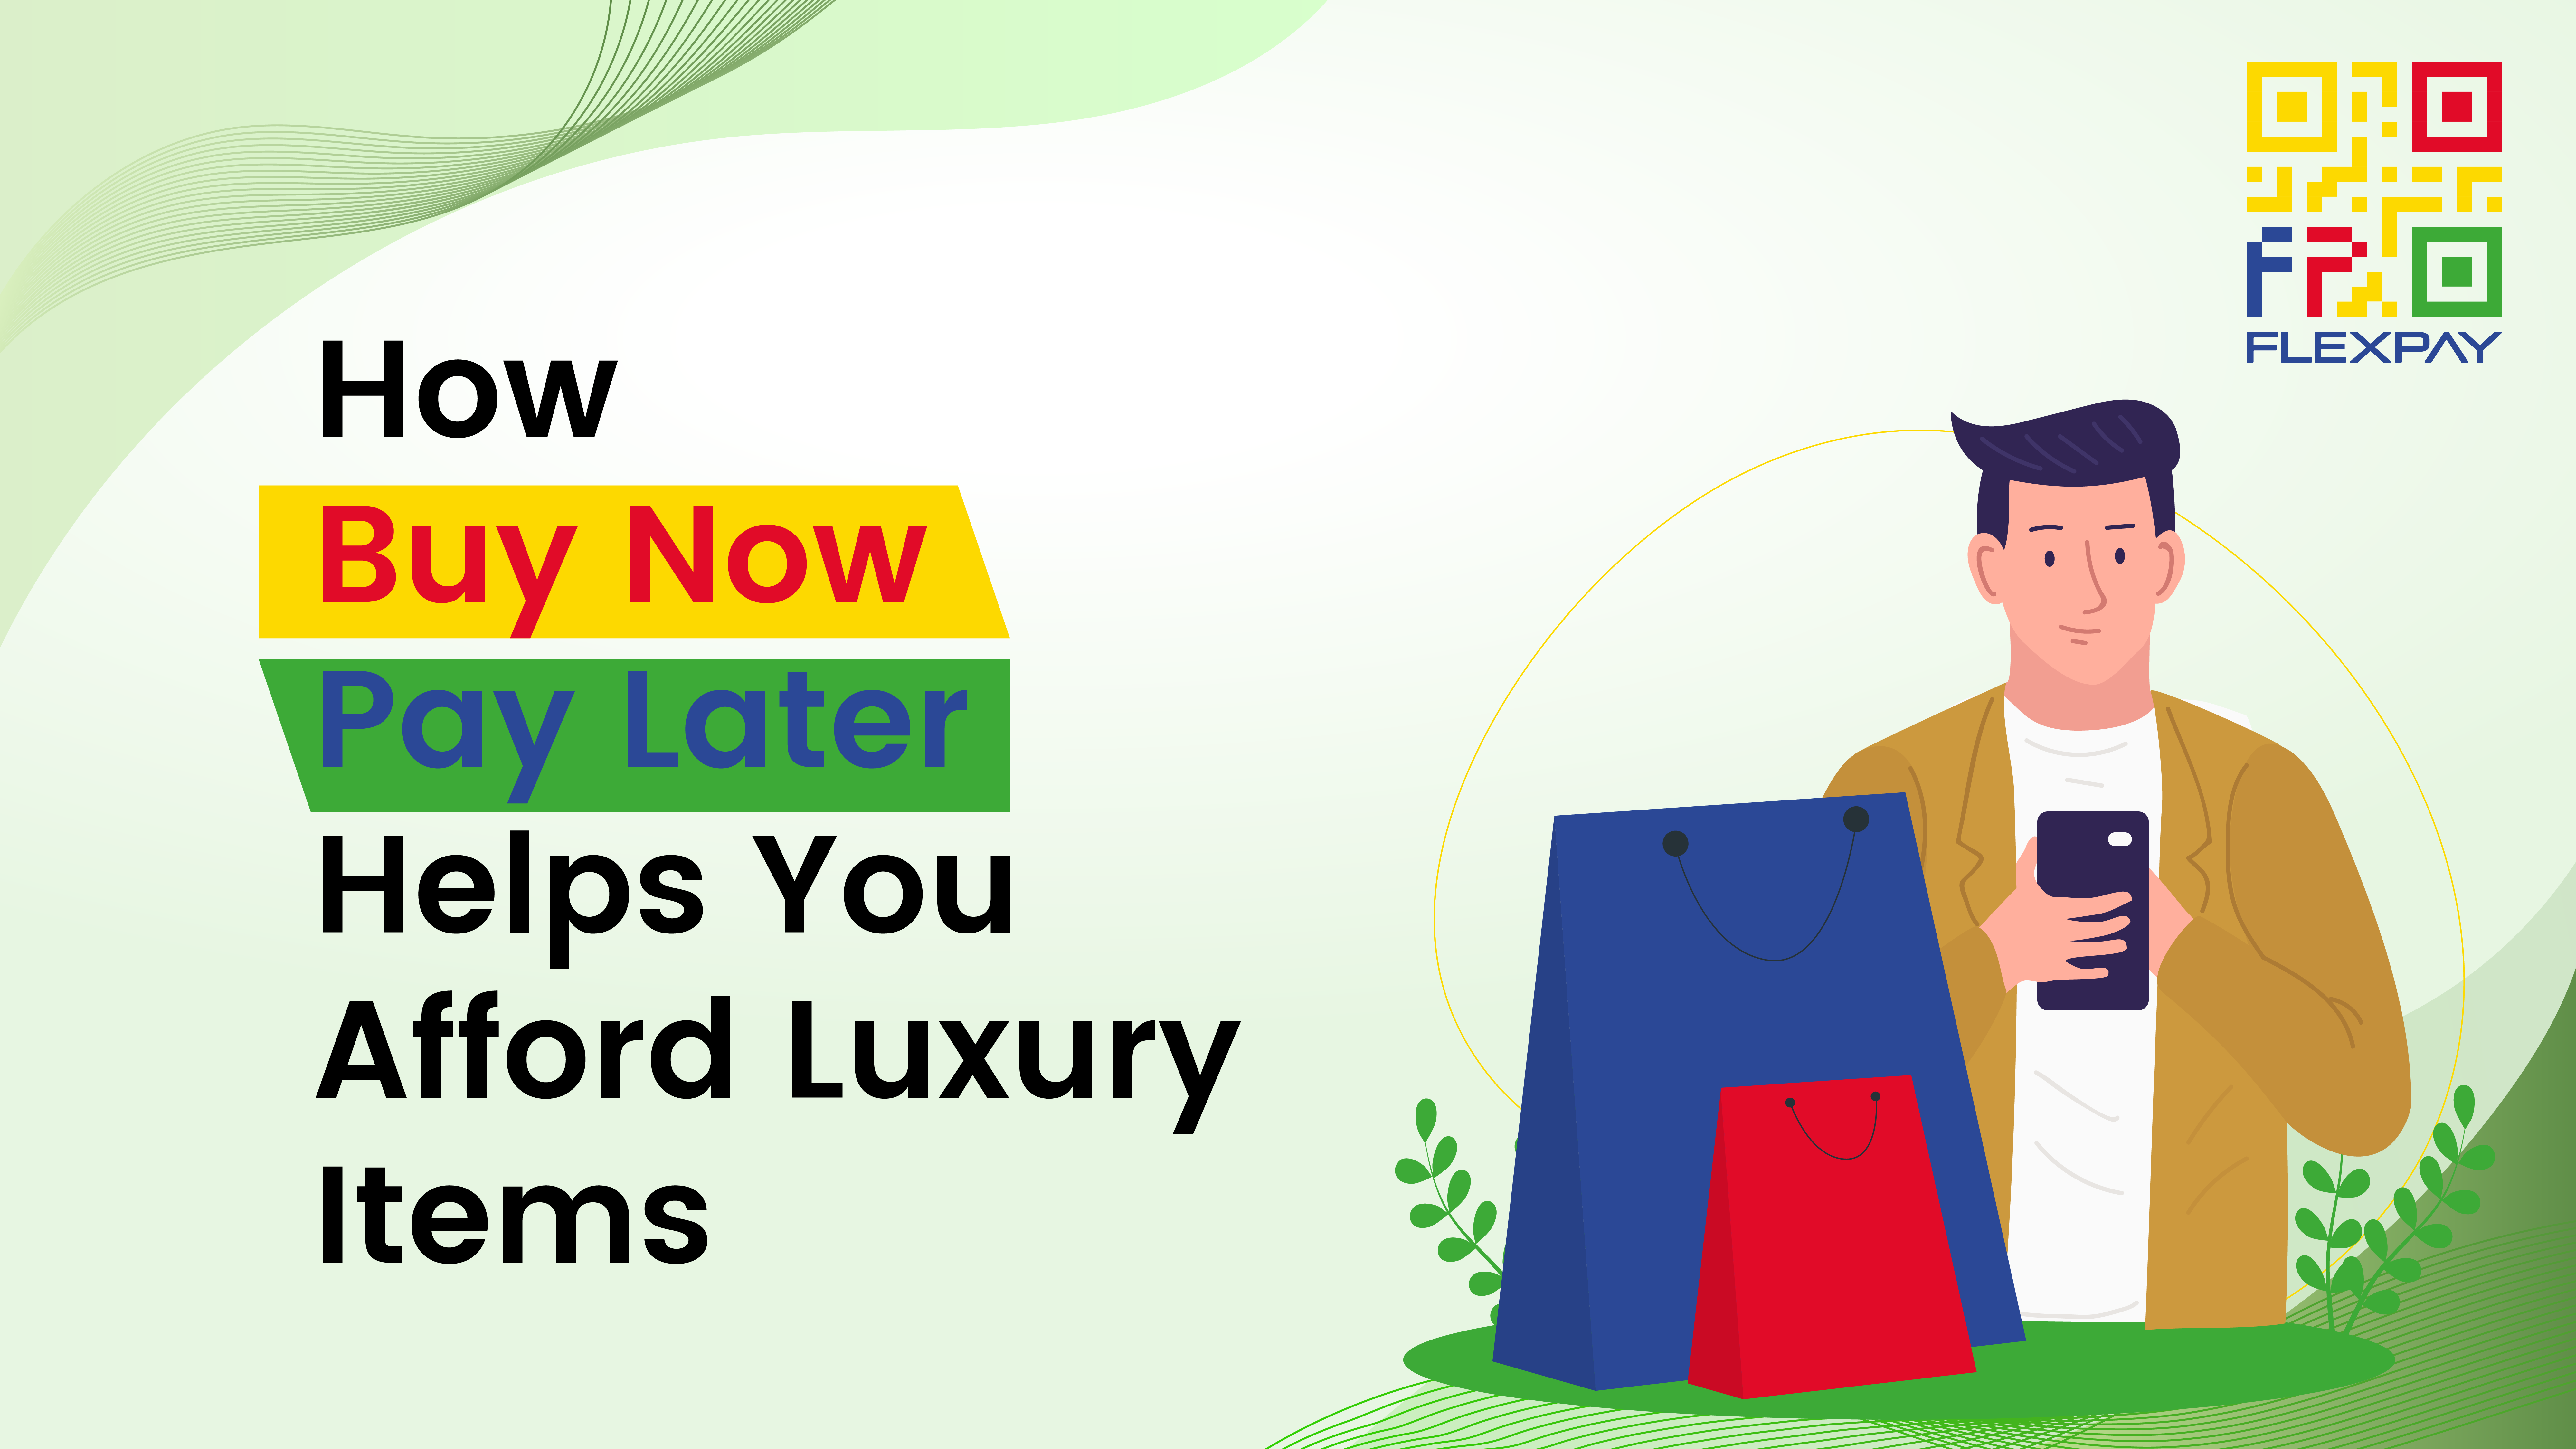 Making Your Dream Purchase: How Buy Now, Pay Later Helps You Afford Luxury Items